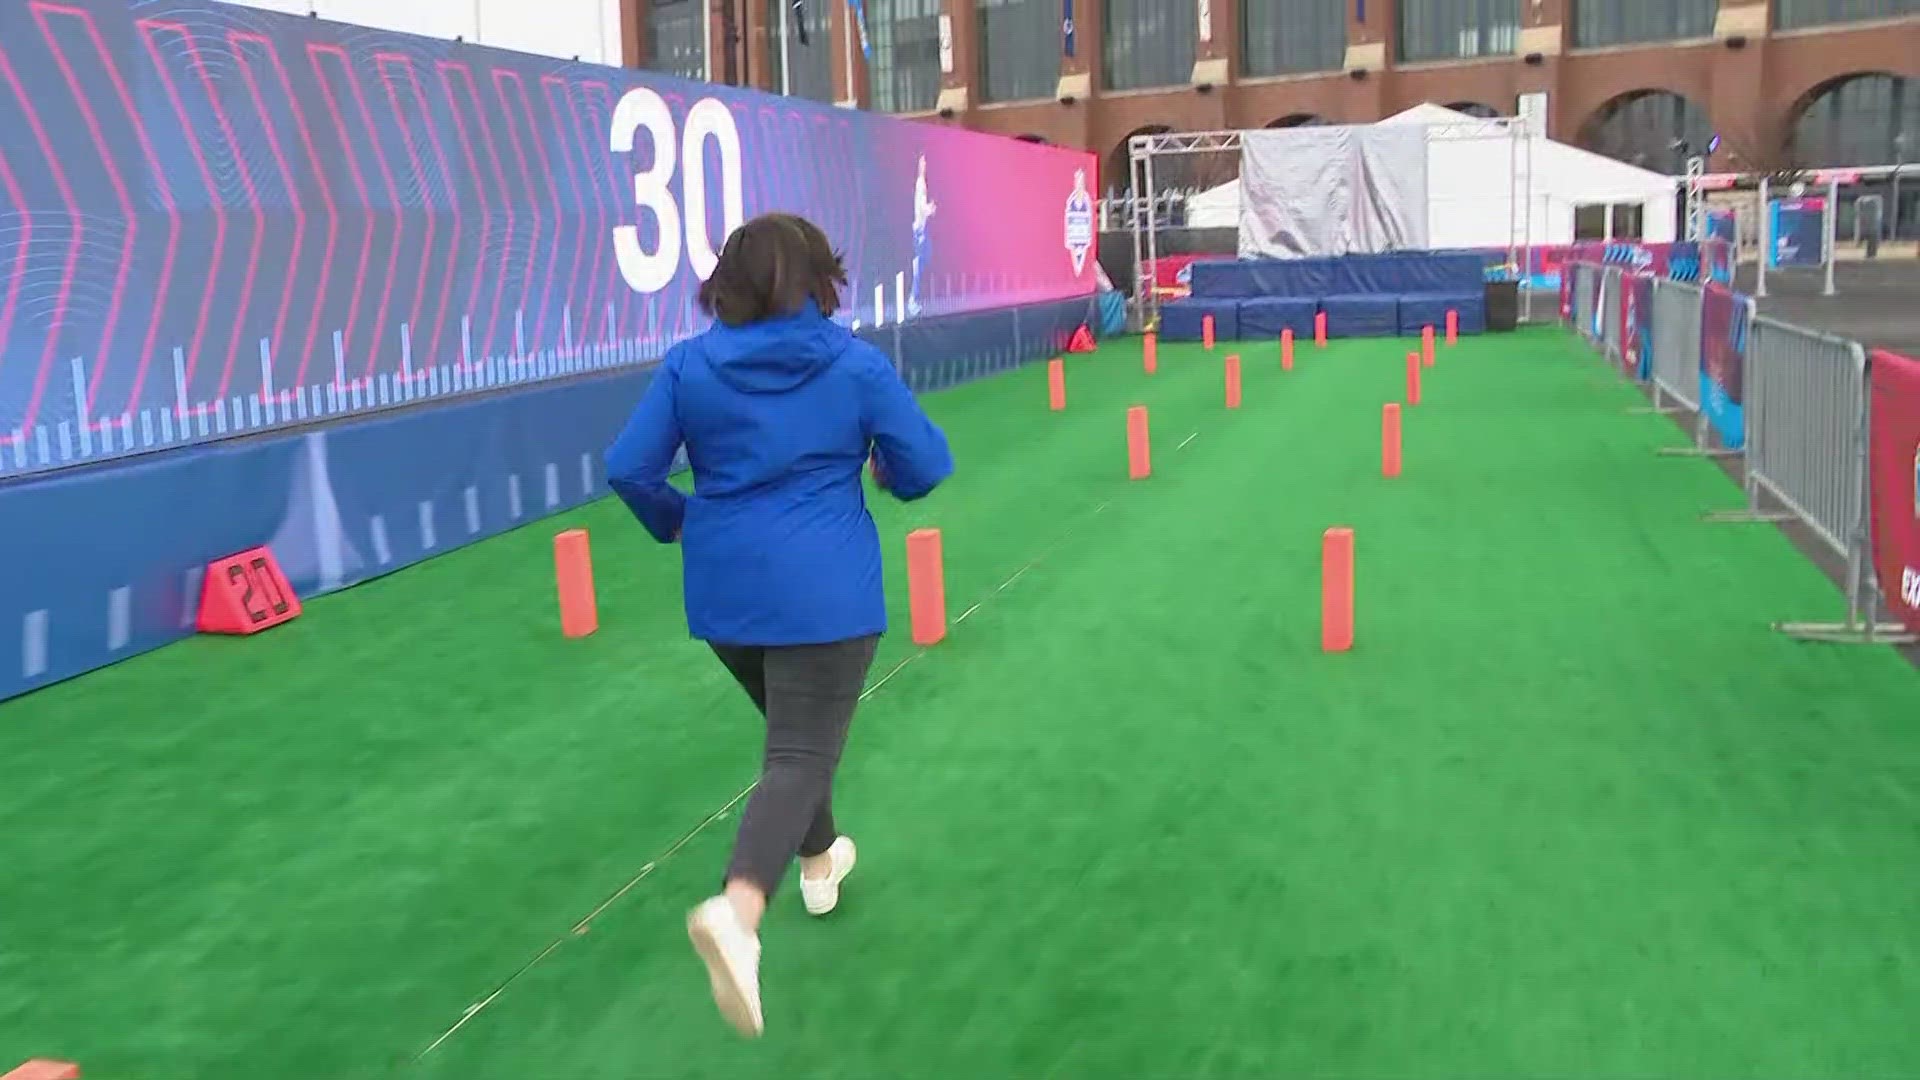 13Sunrise's Anna Chalker runs in the 40-yard dash during the NFL Scouting Combine.